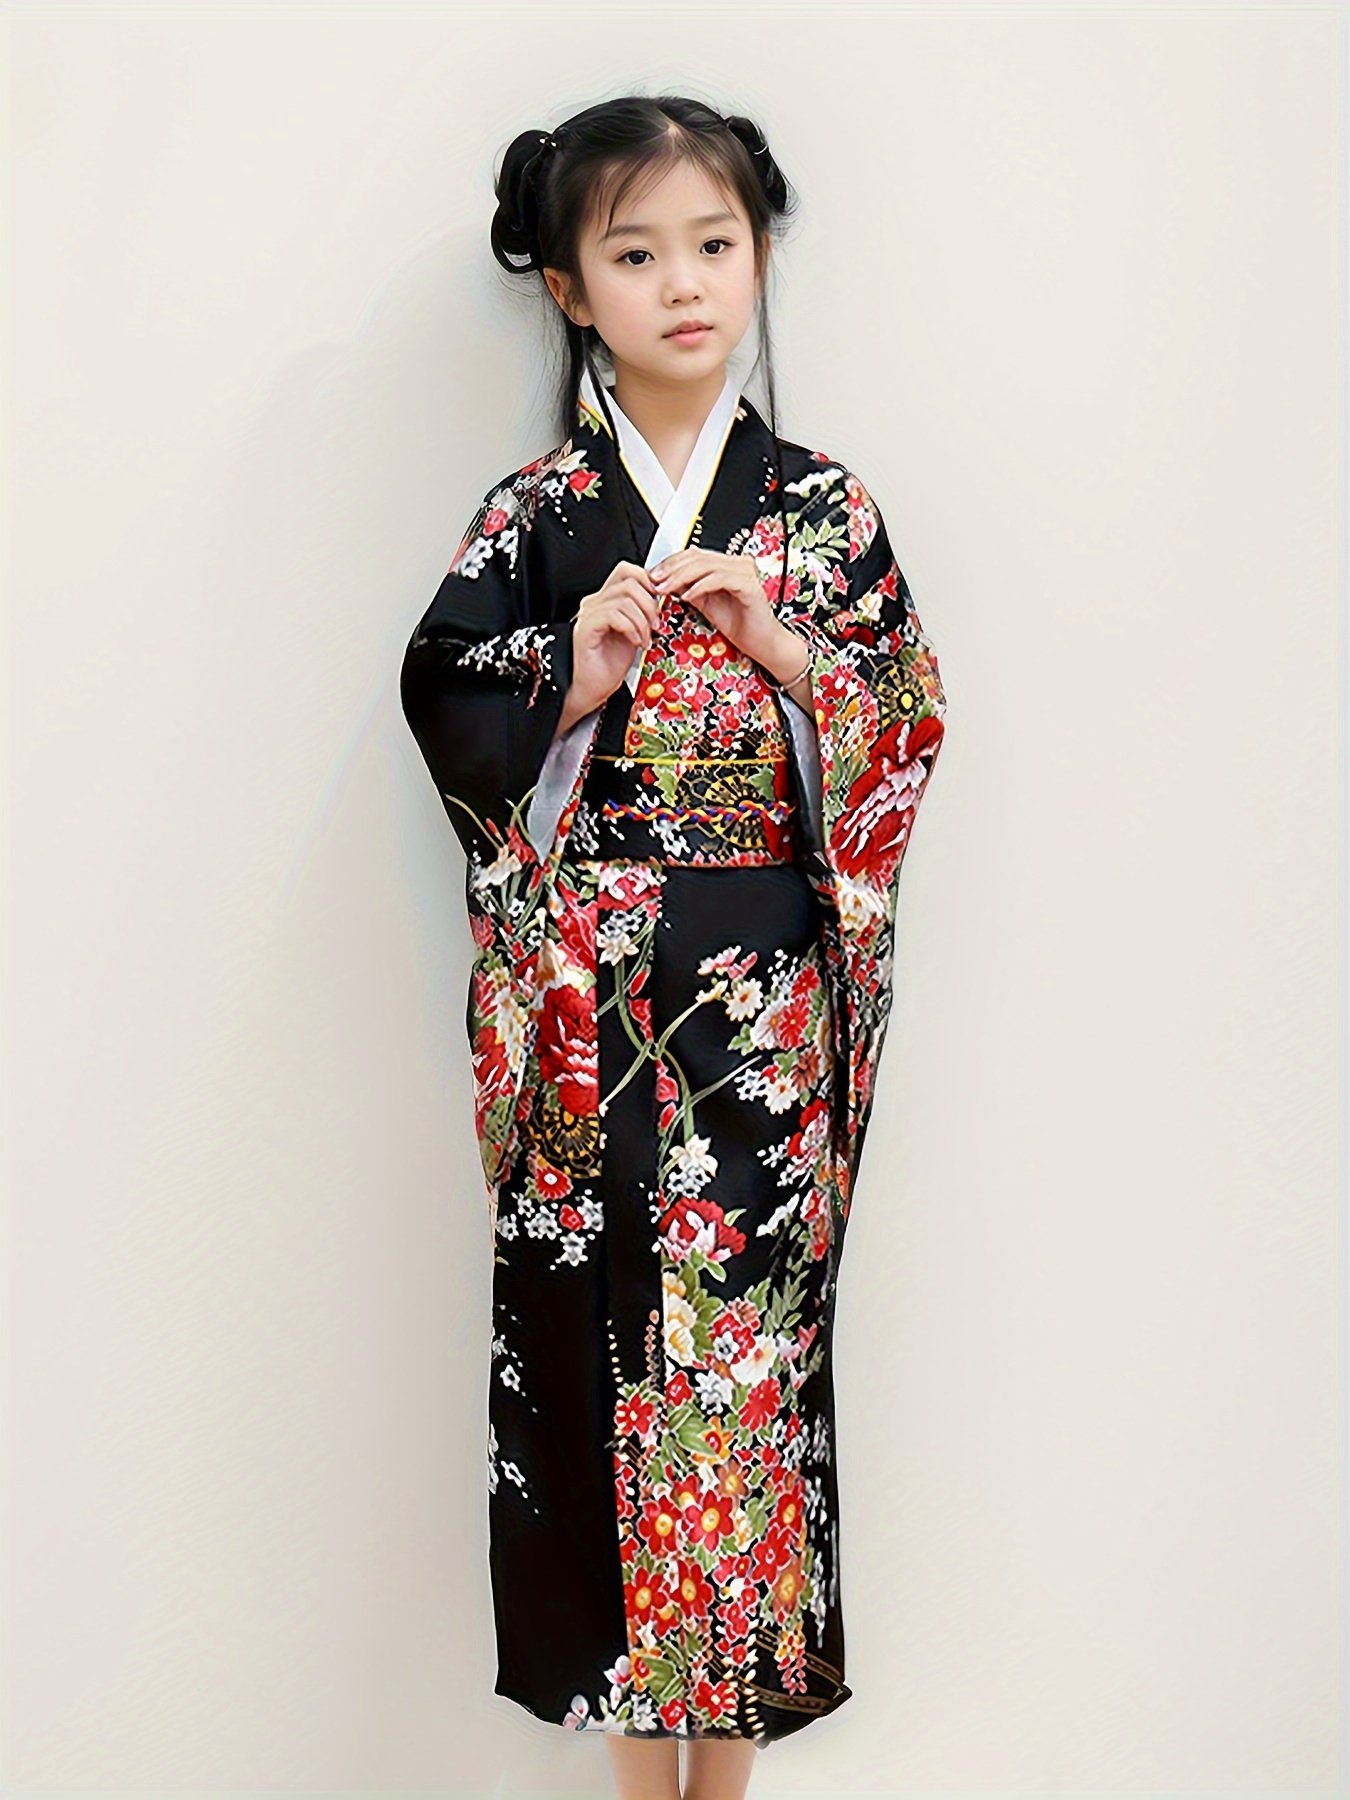 3pcs set of girls floral japanese kimono with traditional sleeves clothing waistband back pillow cultural elegant suit holiday gift